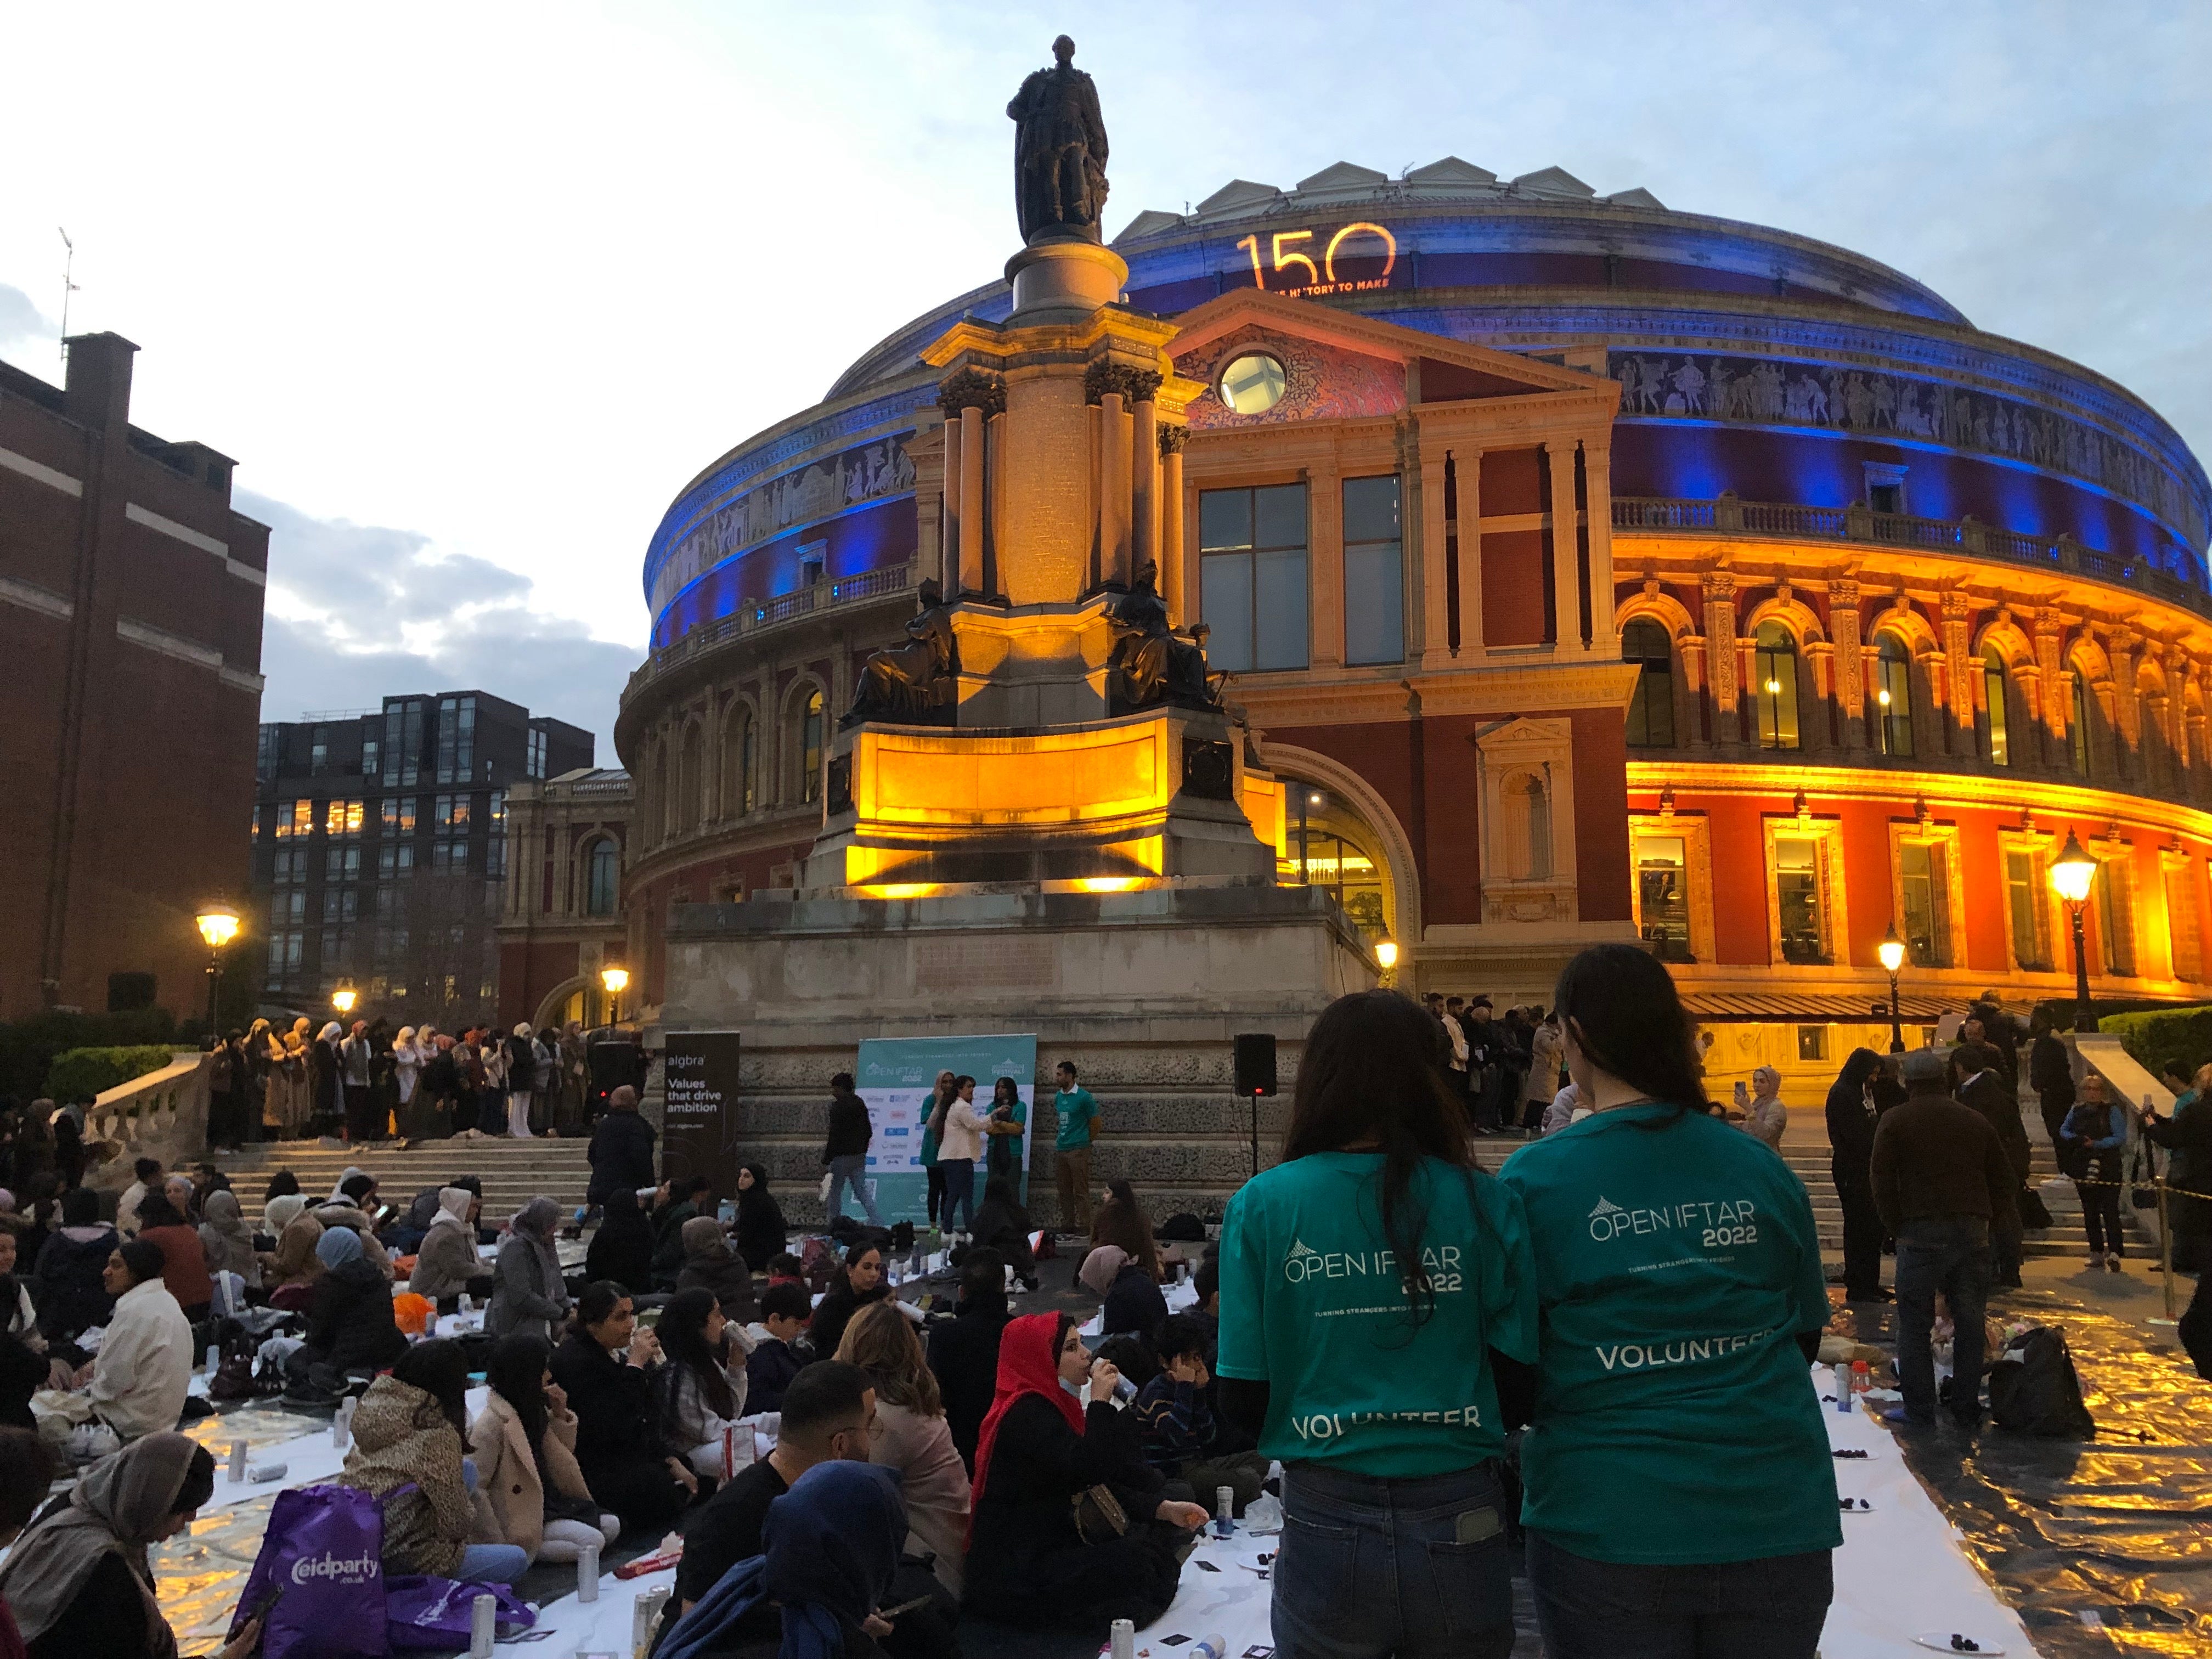 Hundreds of people volunteer their time every year to make Open Iftar possible and accessible for all